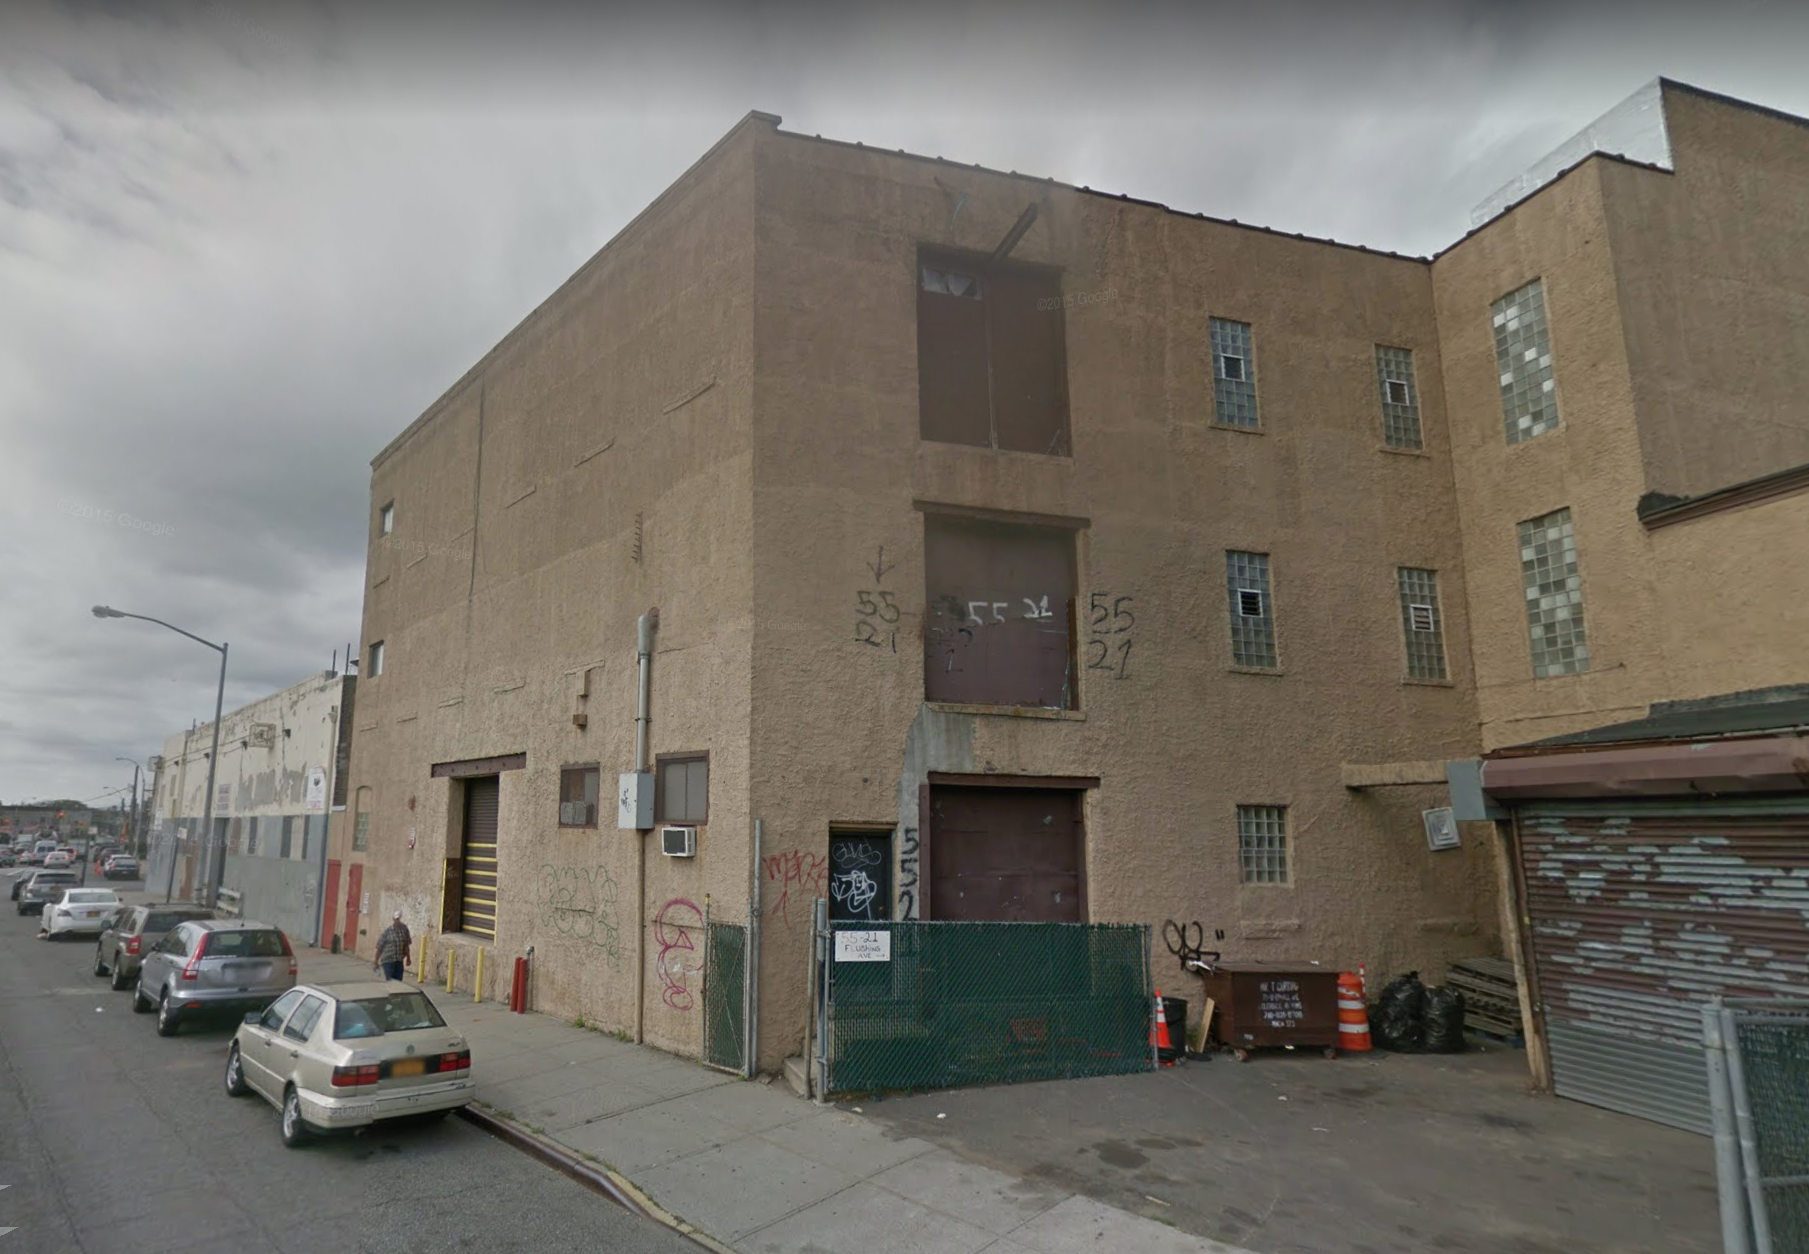 An illegal nightclub operated out of this warehouse on Flushing Avenue in Maspeth.